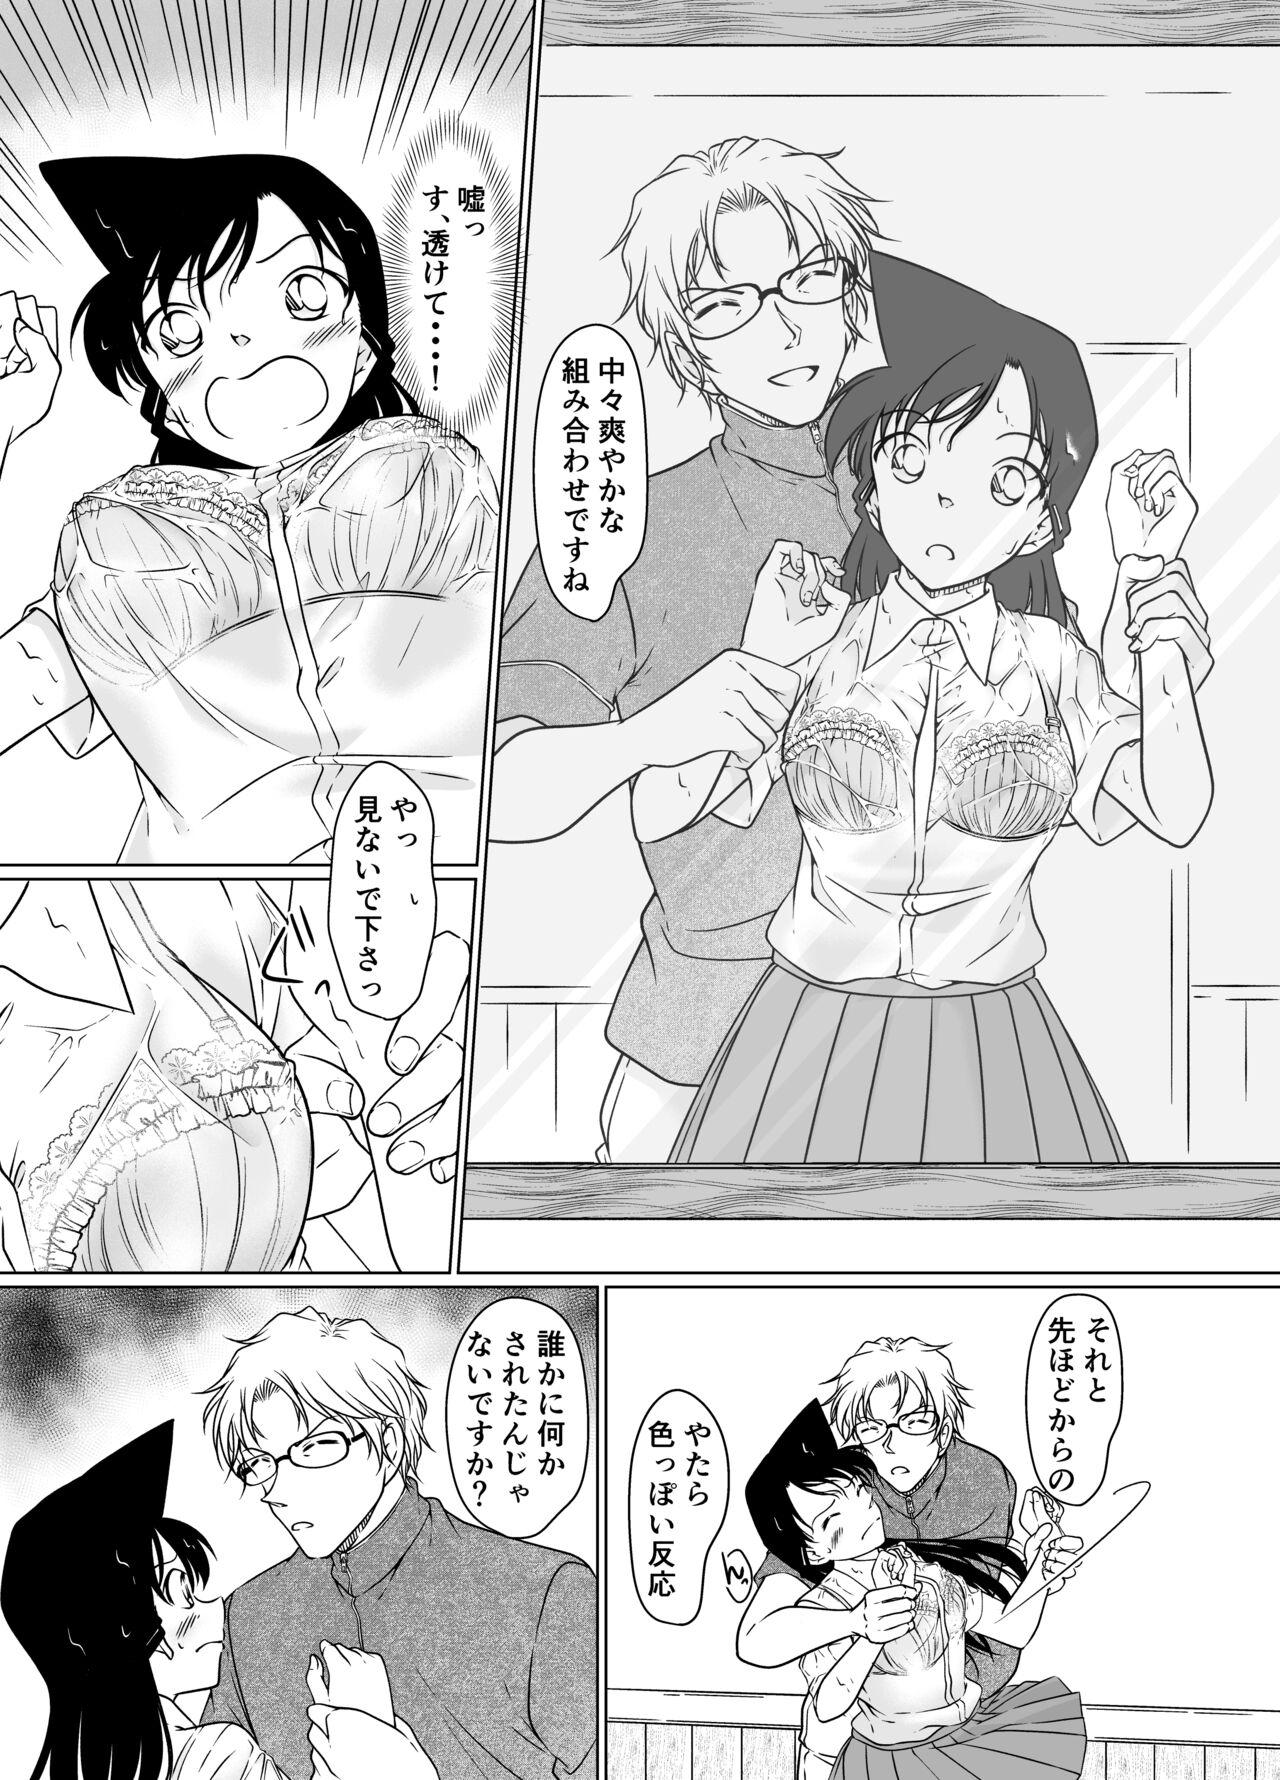 【Detective Conan】Something is wrong in the afternoon 6